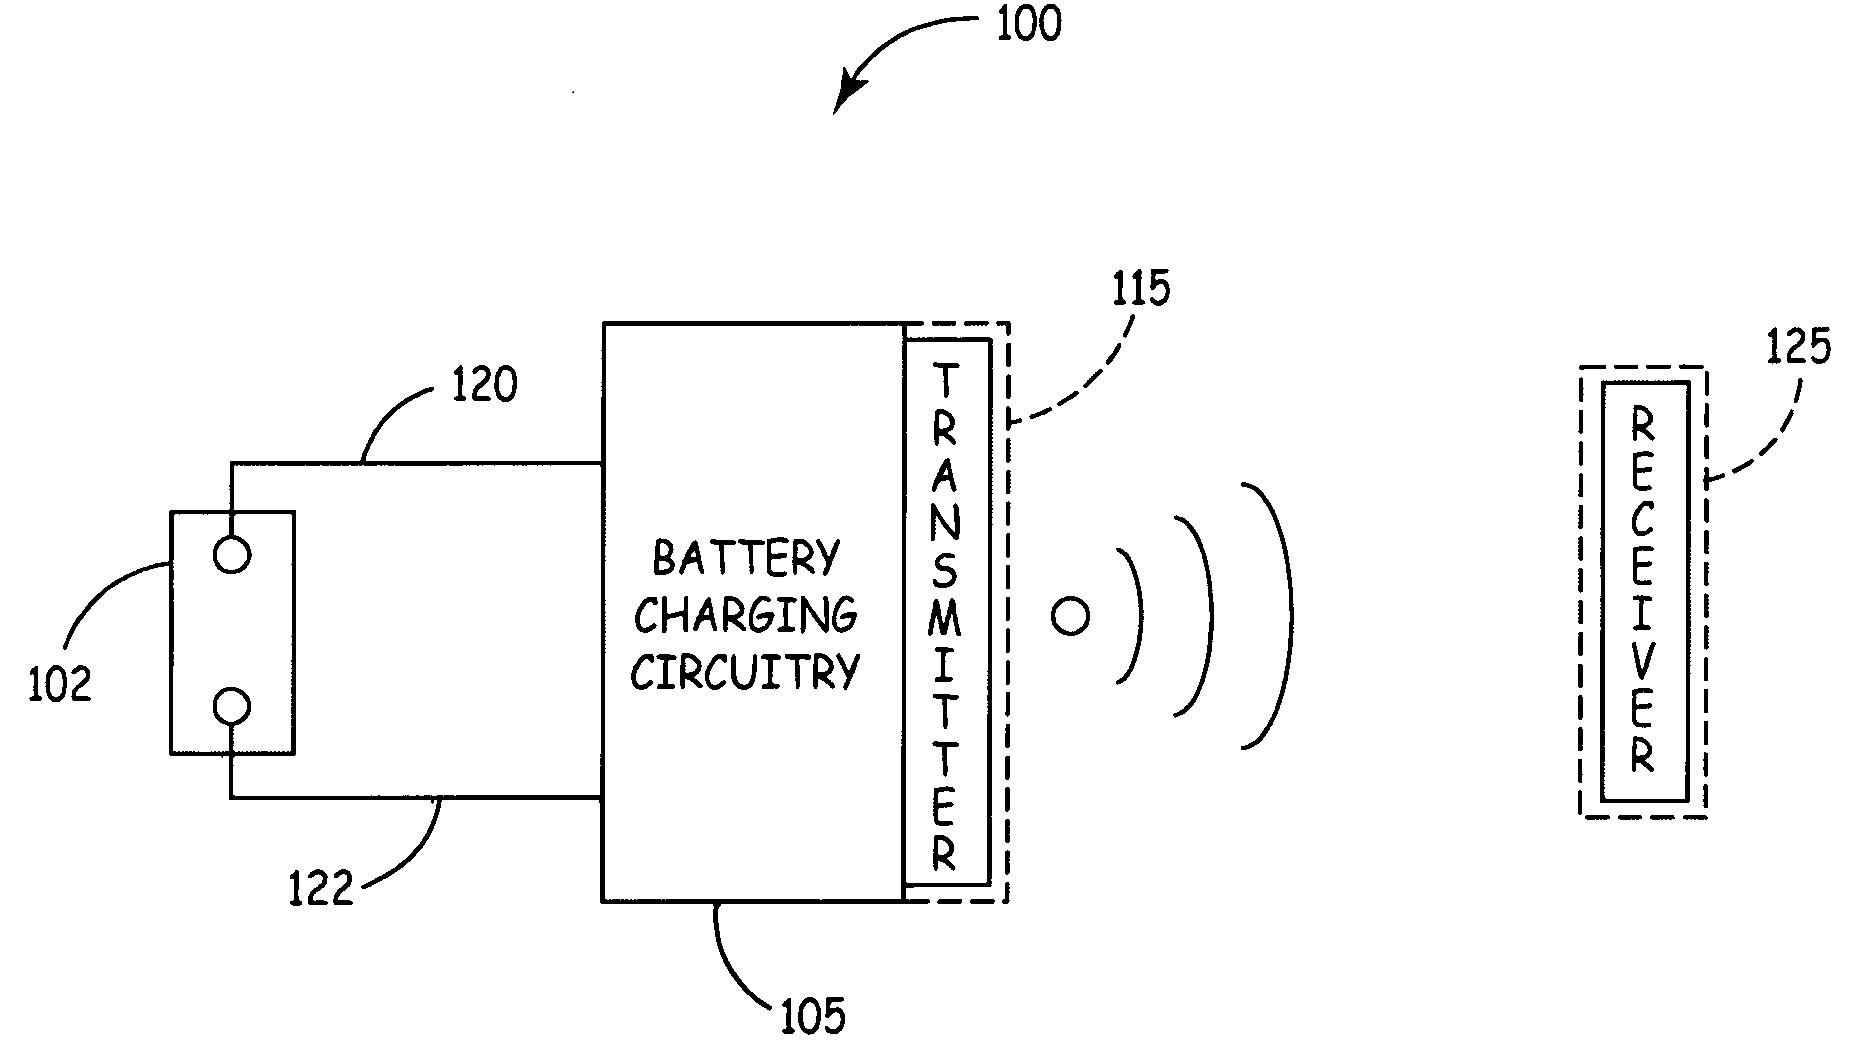 Battery charger with automatic customer notification system